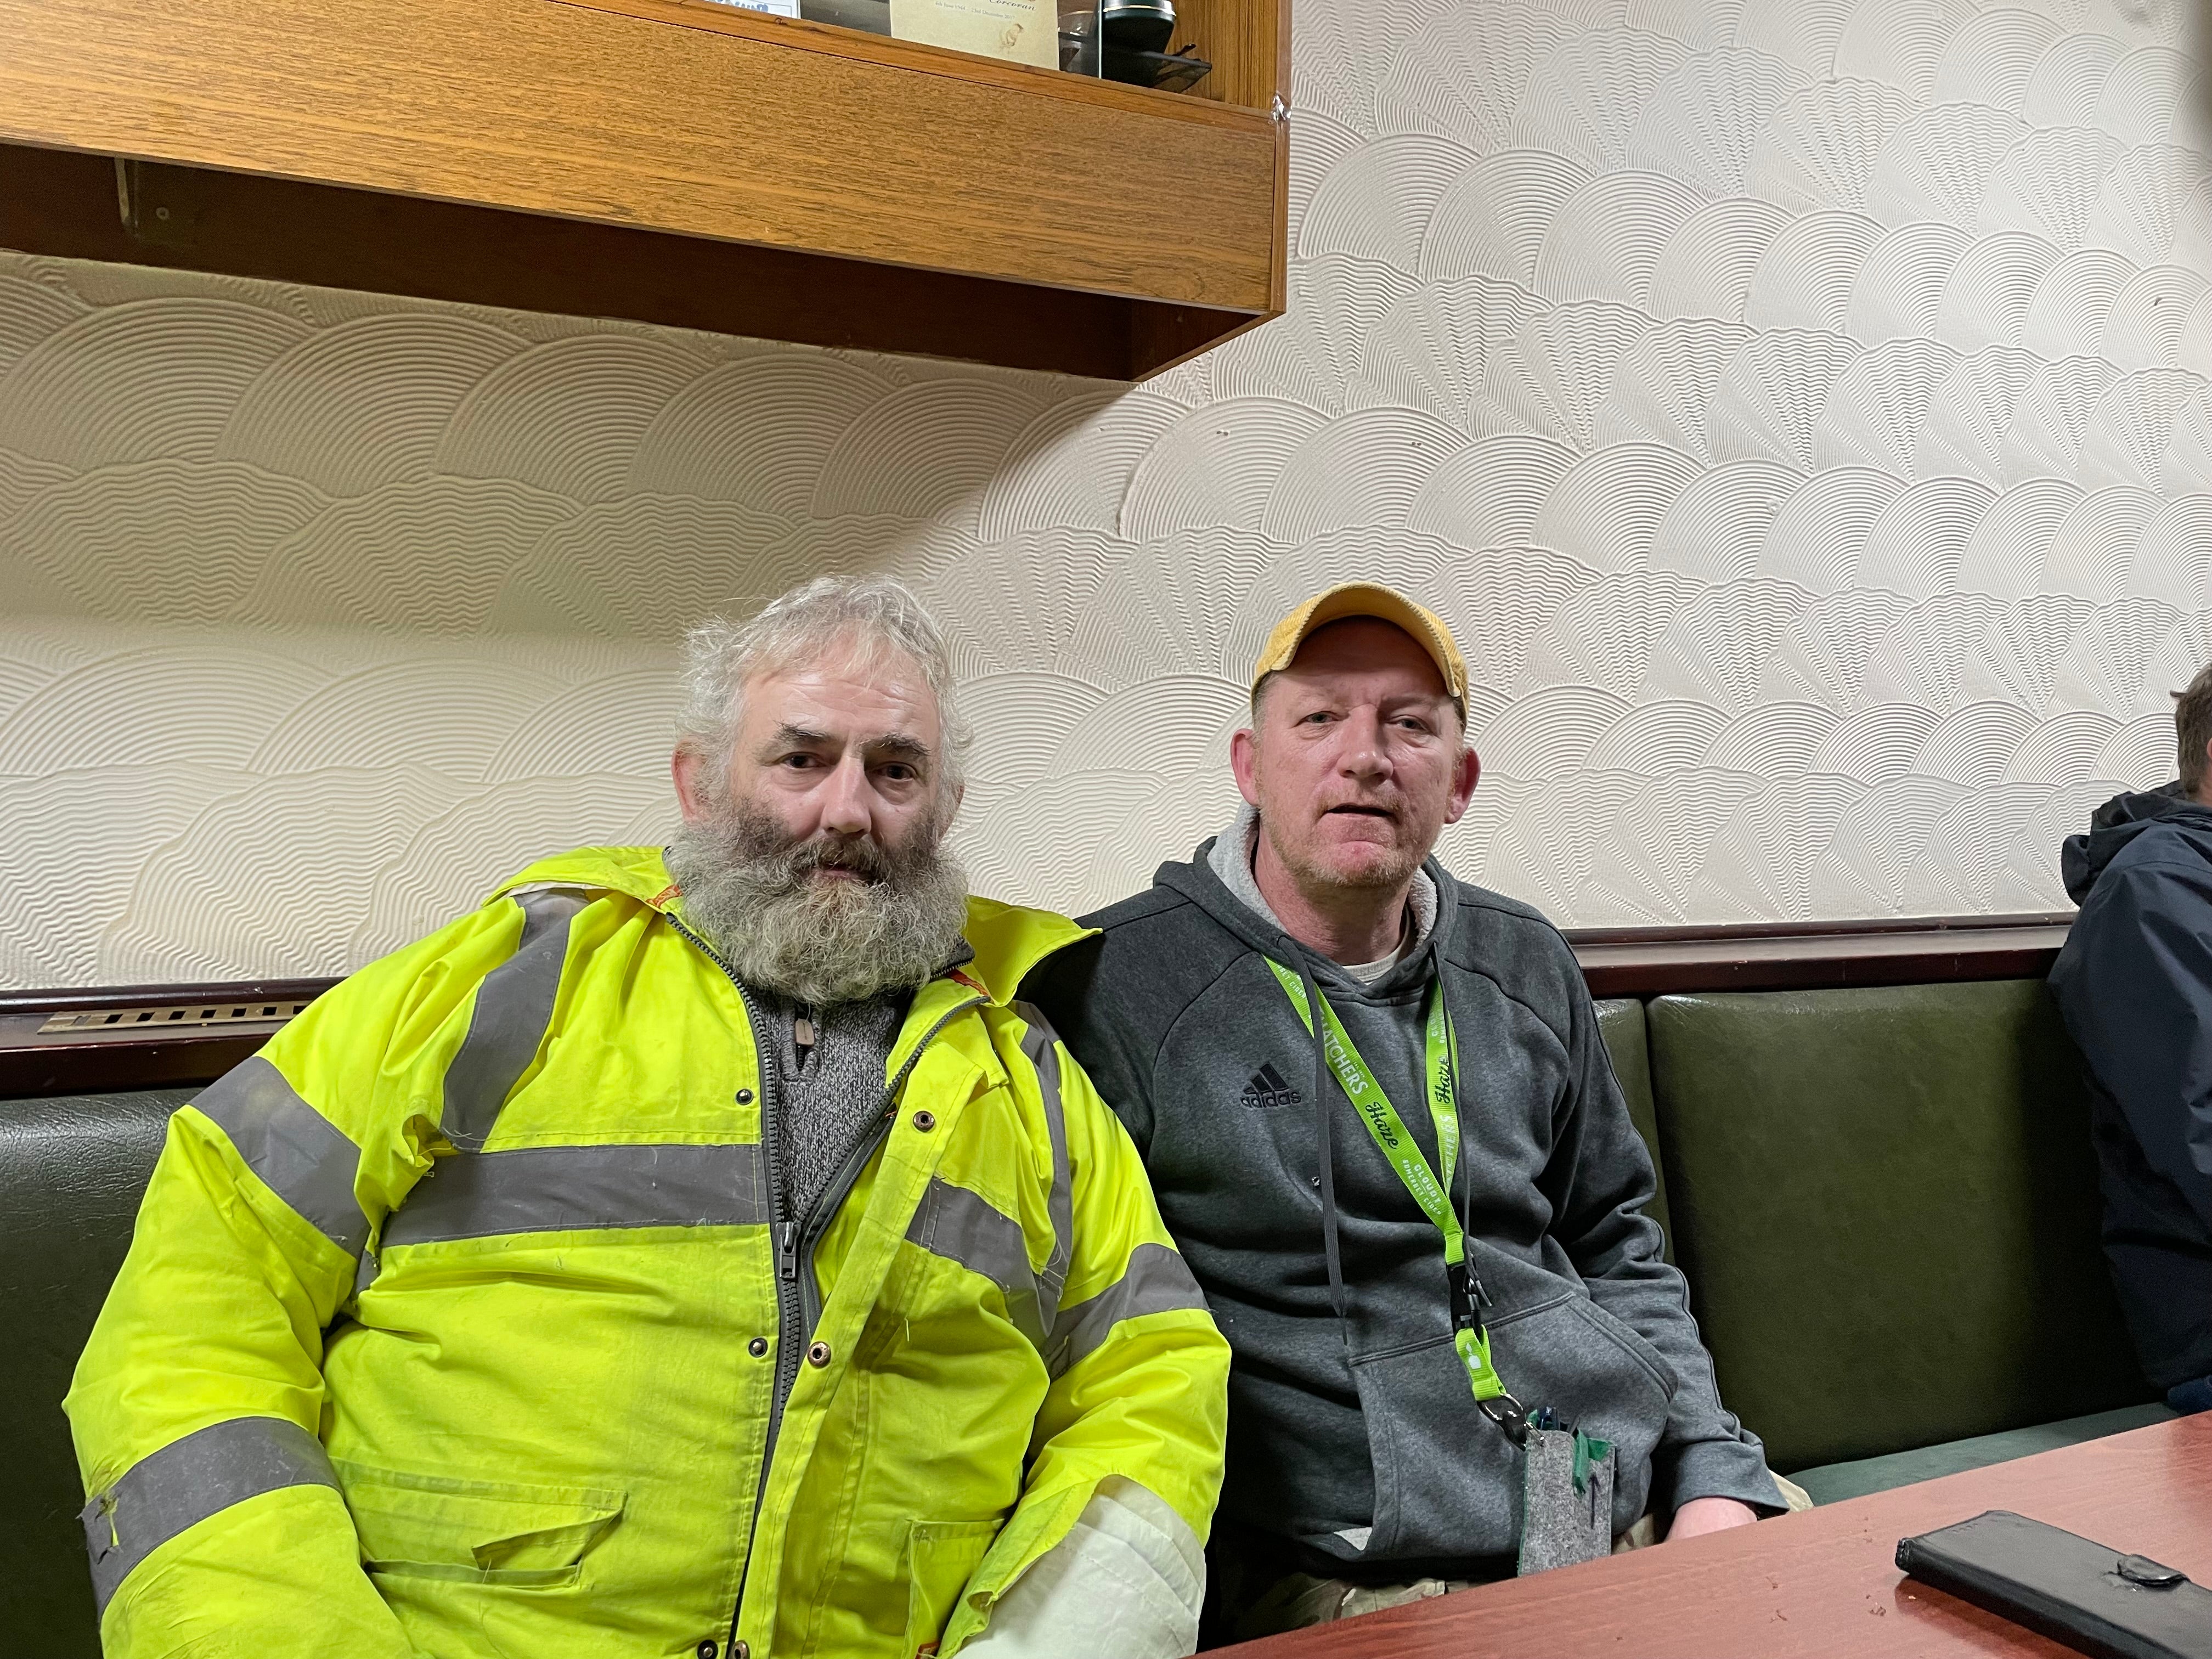 Anthony Andrews (left) and Gary English both worked at the Tata steelworks in Port Talbot - on Friday they were among drinkers discussing the partial closure in the Seaside and Social Club